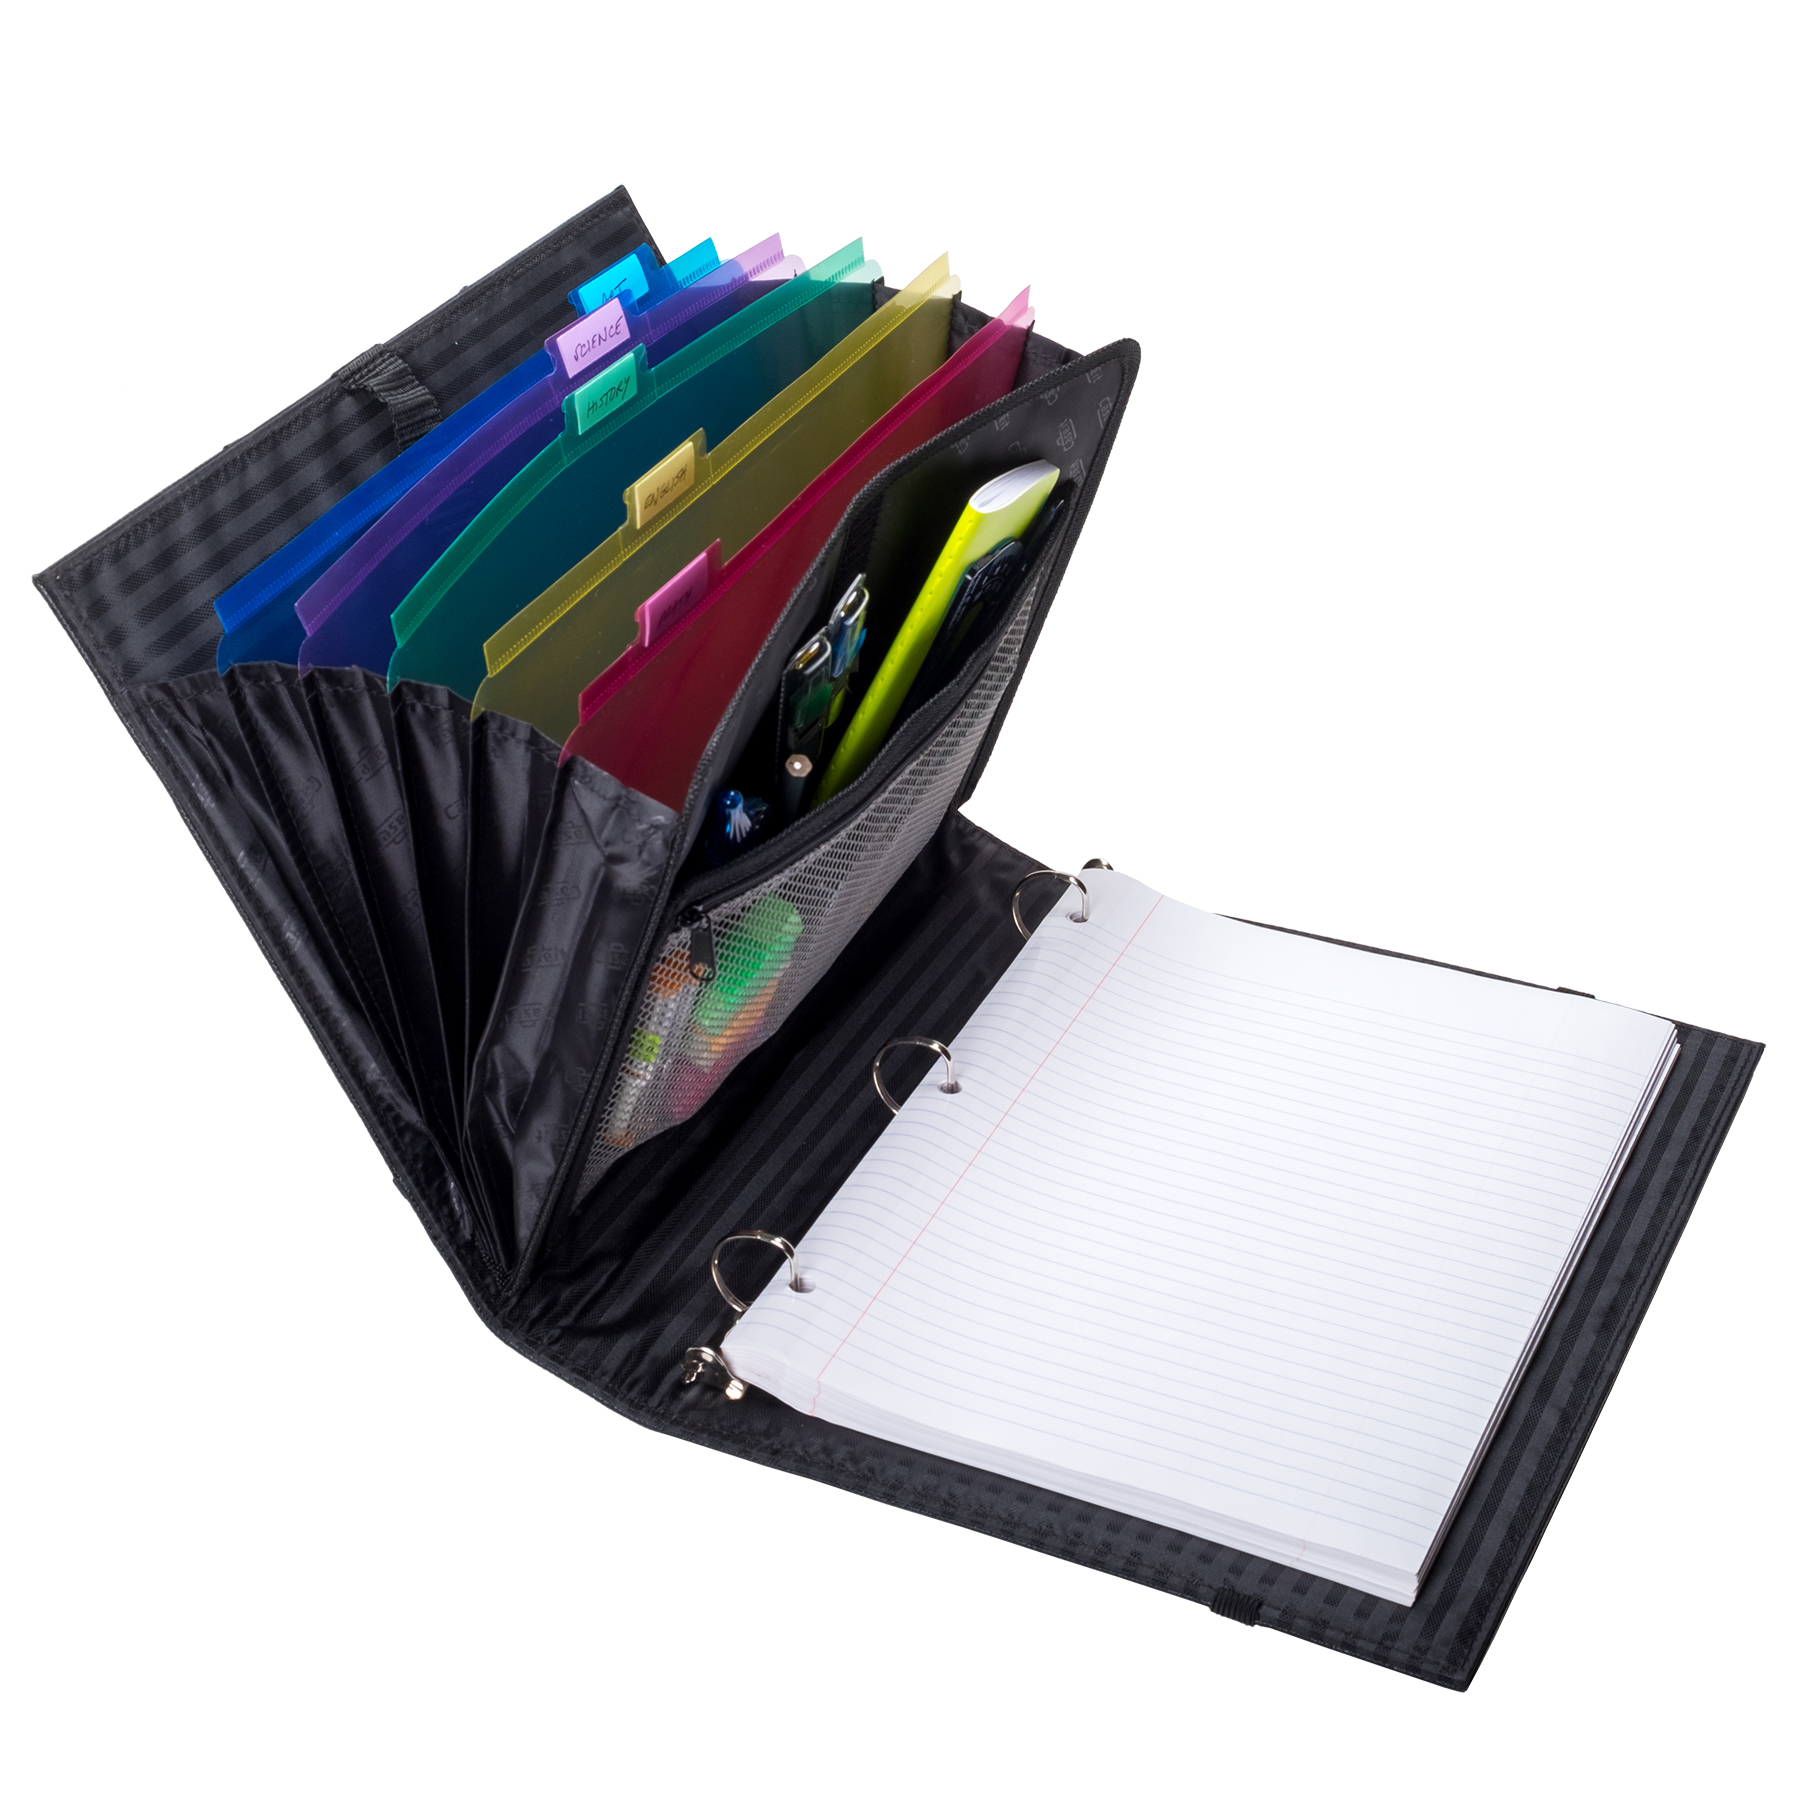 The Pro Binder - Case•it Case-it professional organization at your